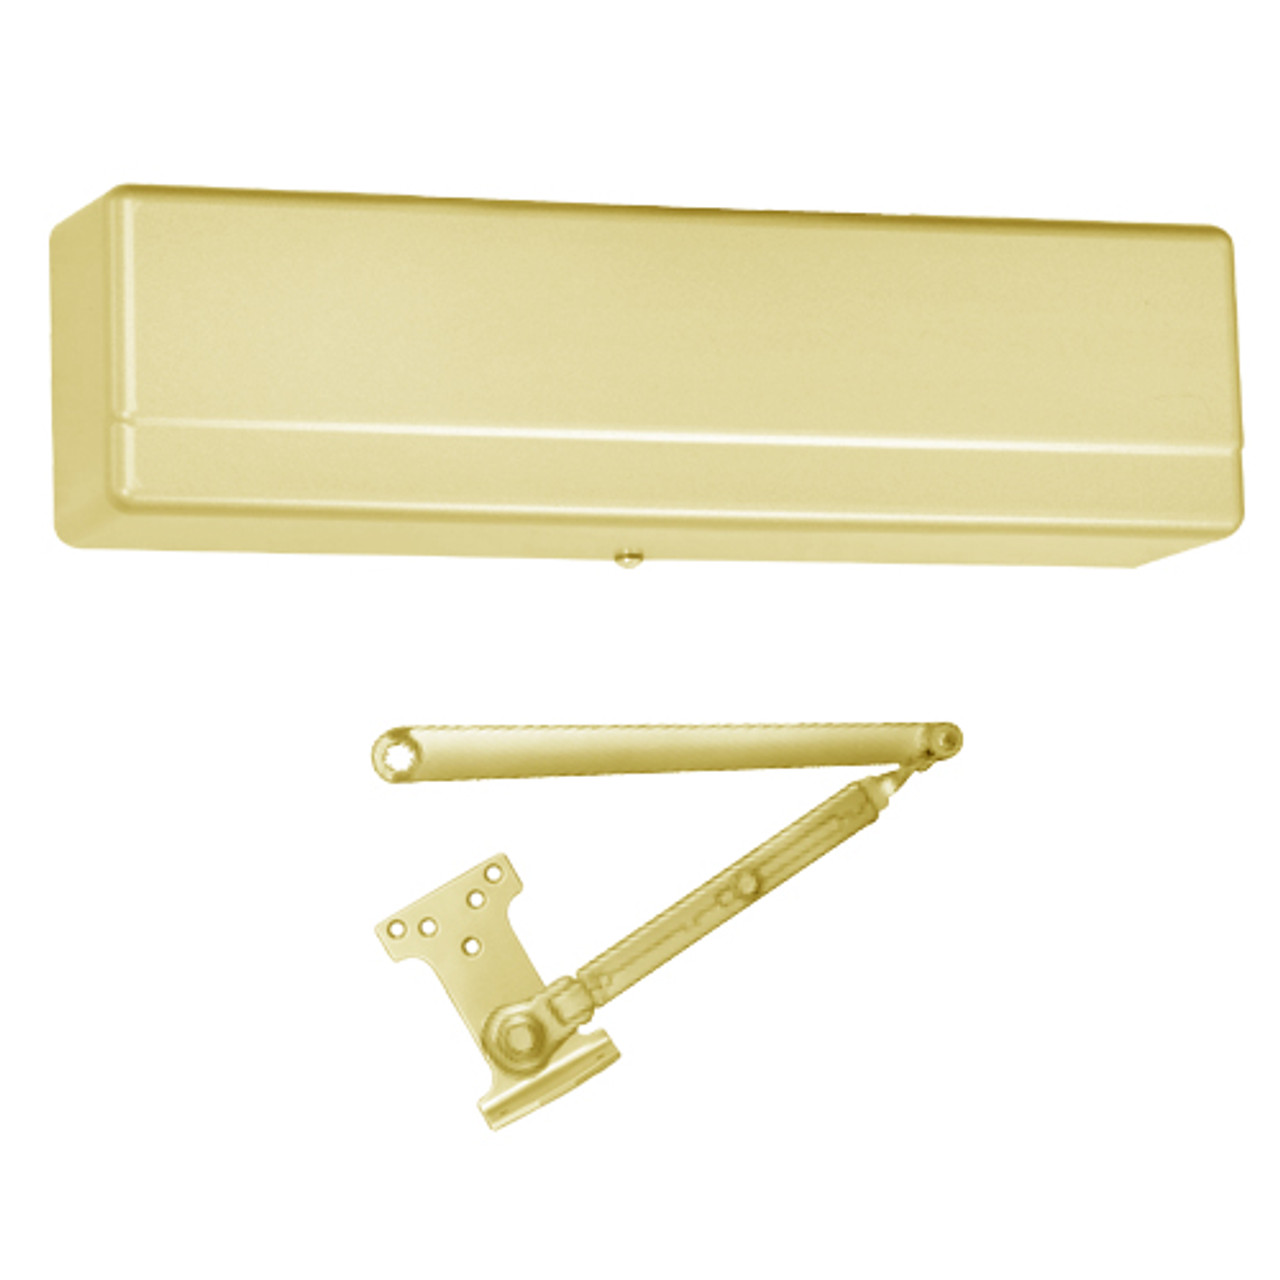 1431-PH9-EAB Sargent 1431 Series Powerglide Door Closer with PH9 Friction Hold Open Arm in Brass Powder Coat